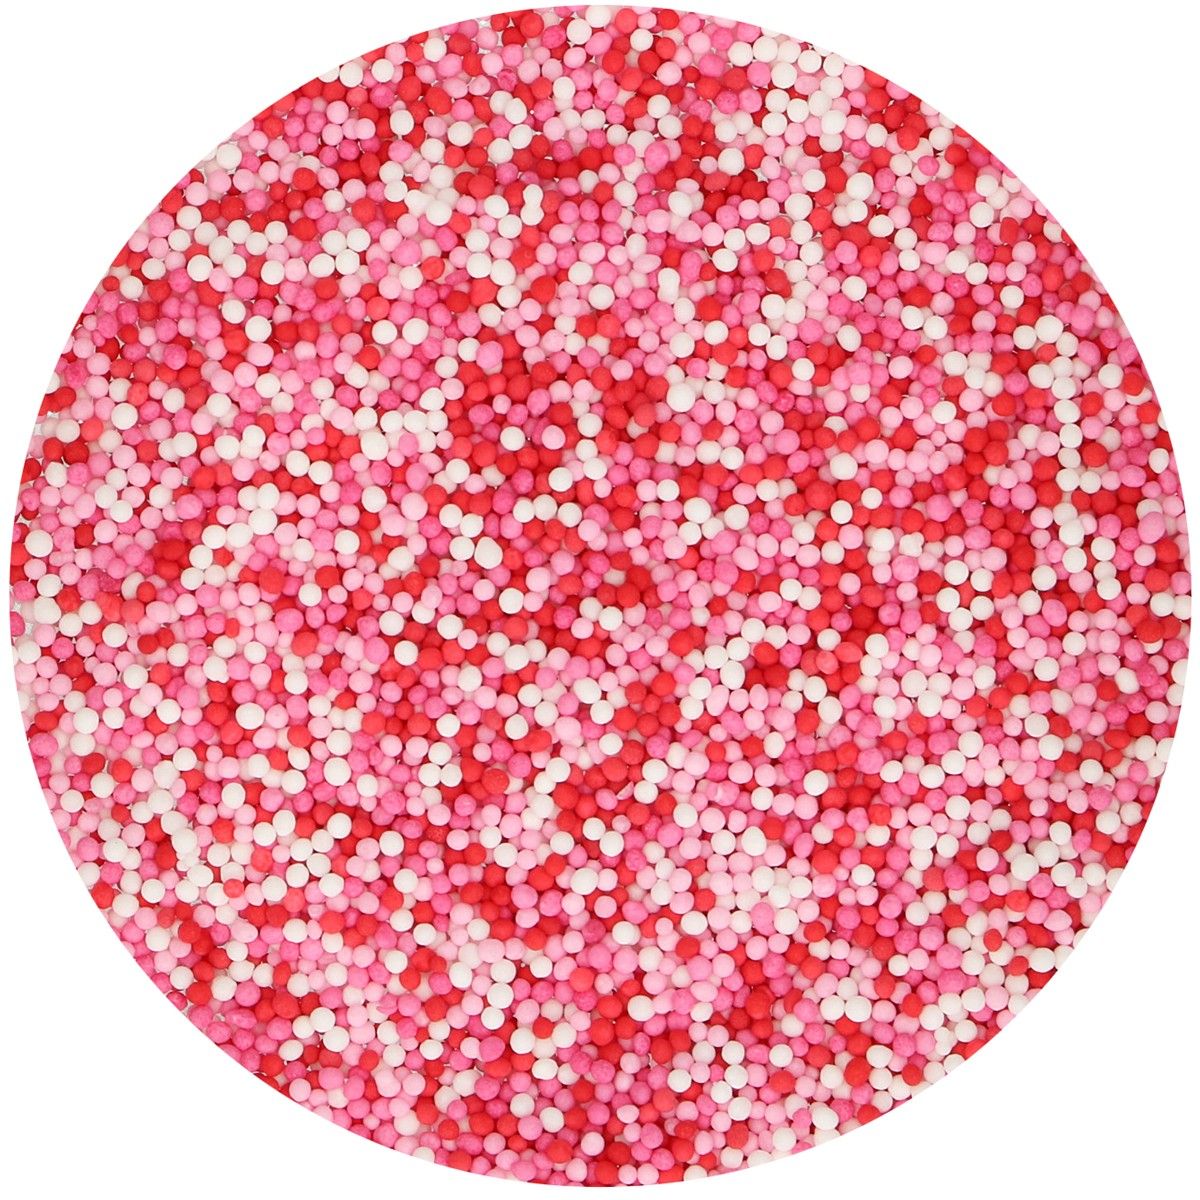 Funcakes nonpareils lots of love80g